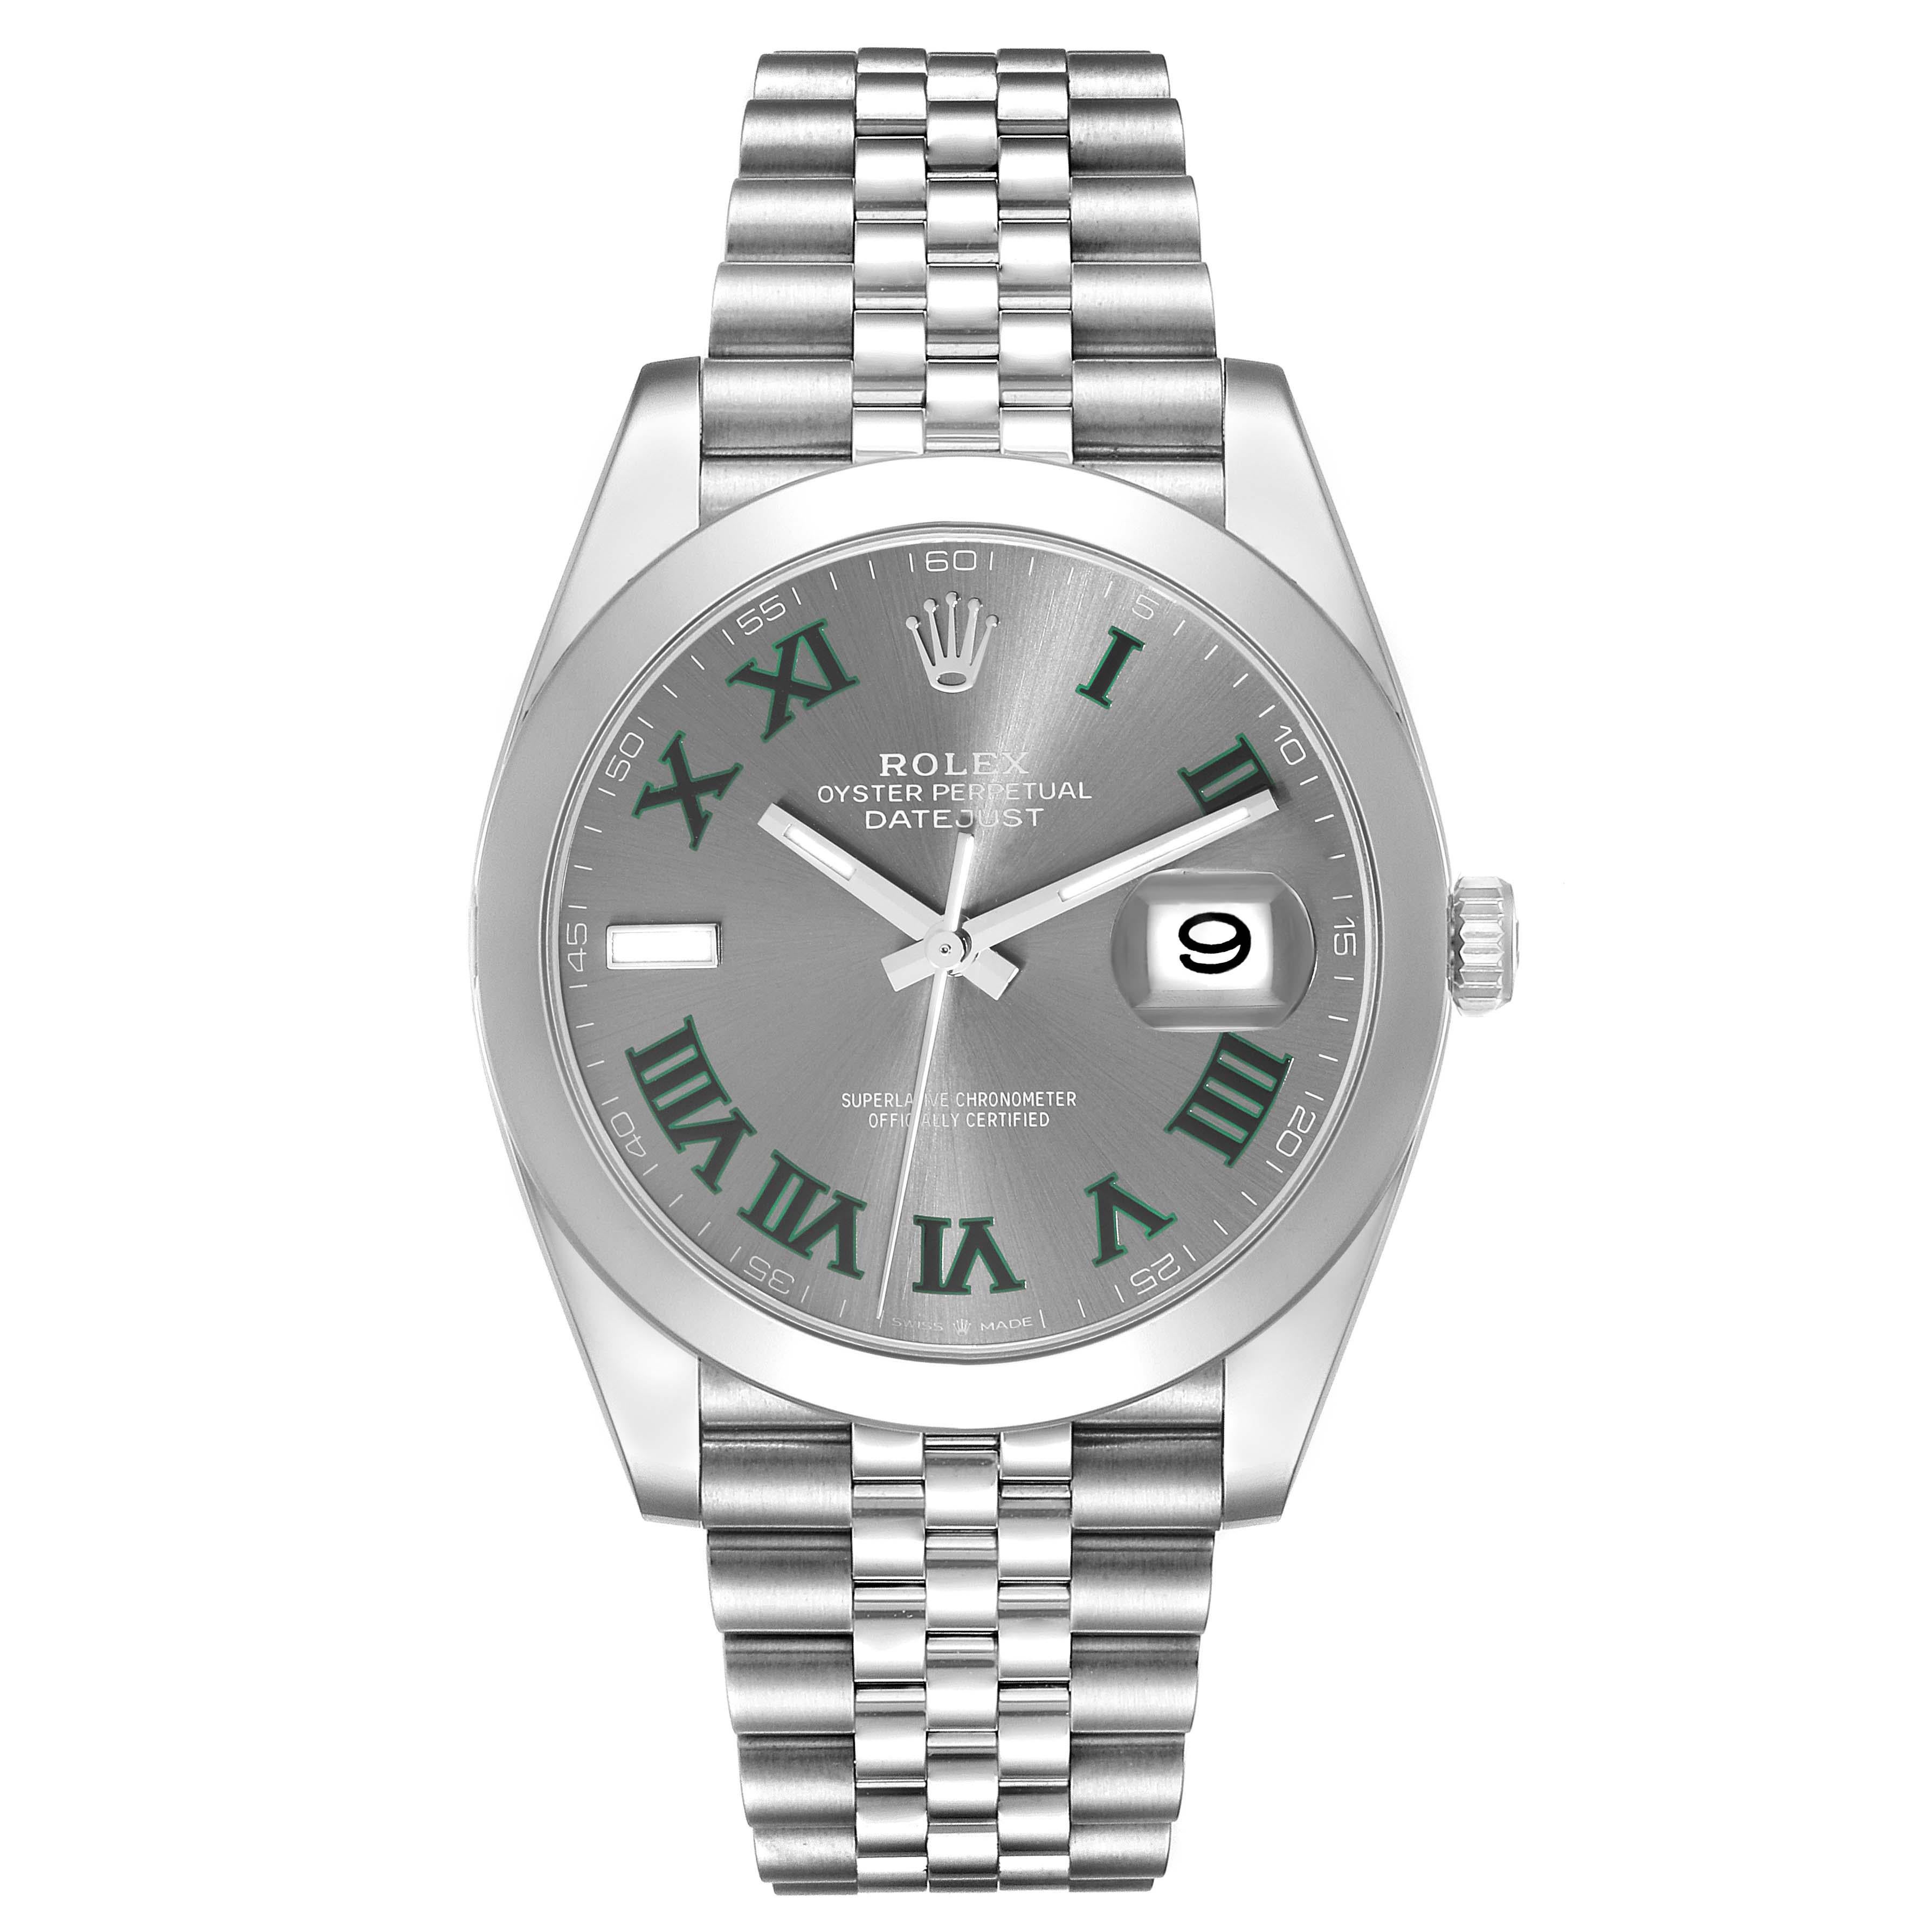 Rolex Datejust 41 Grey Green Wimbledon Dial Steel Mens Watch 126300 Unworn. Officially certified chronometer automatic self-winding movement with quickset date. Stainless steel case 41 mm in diameter. Rolex logo on a crown. Stainless steel smooth